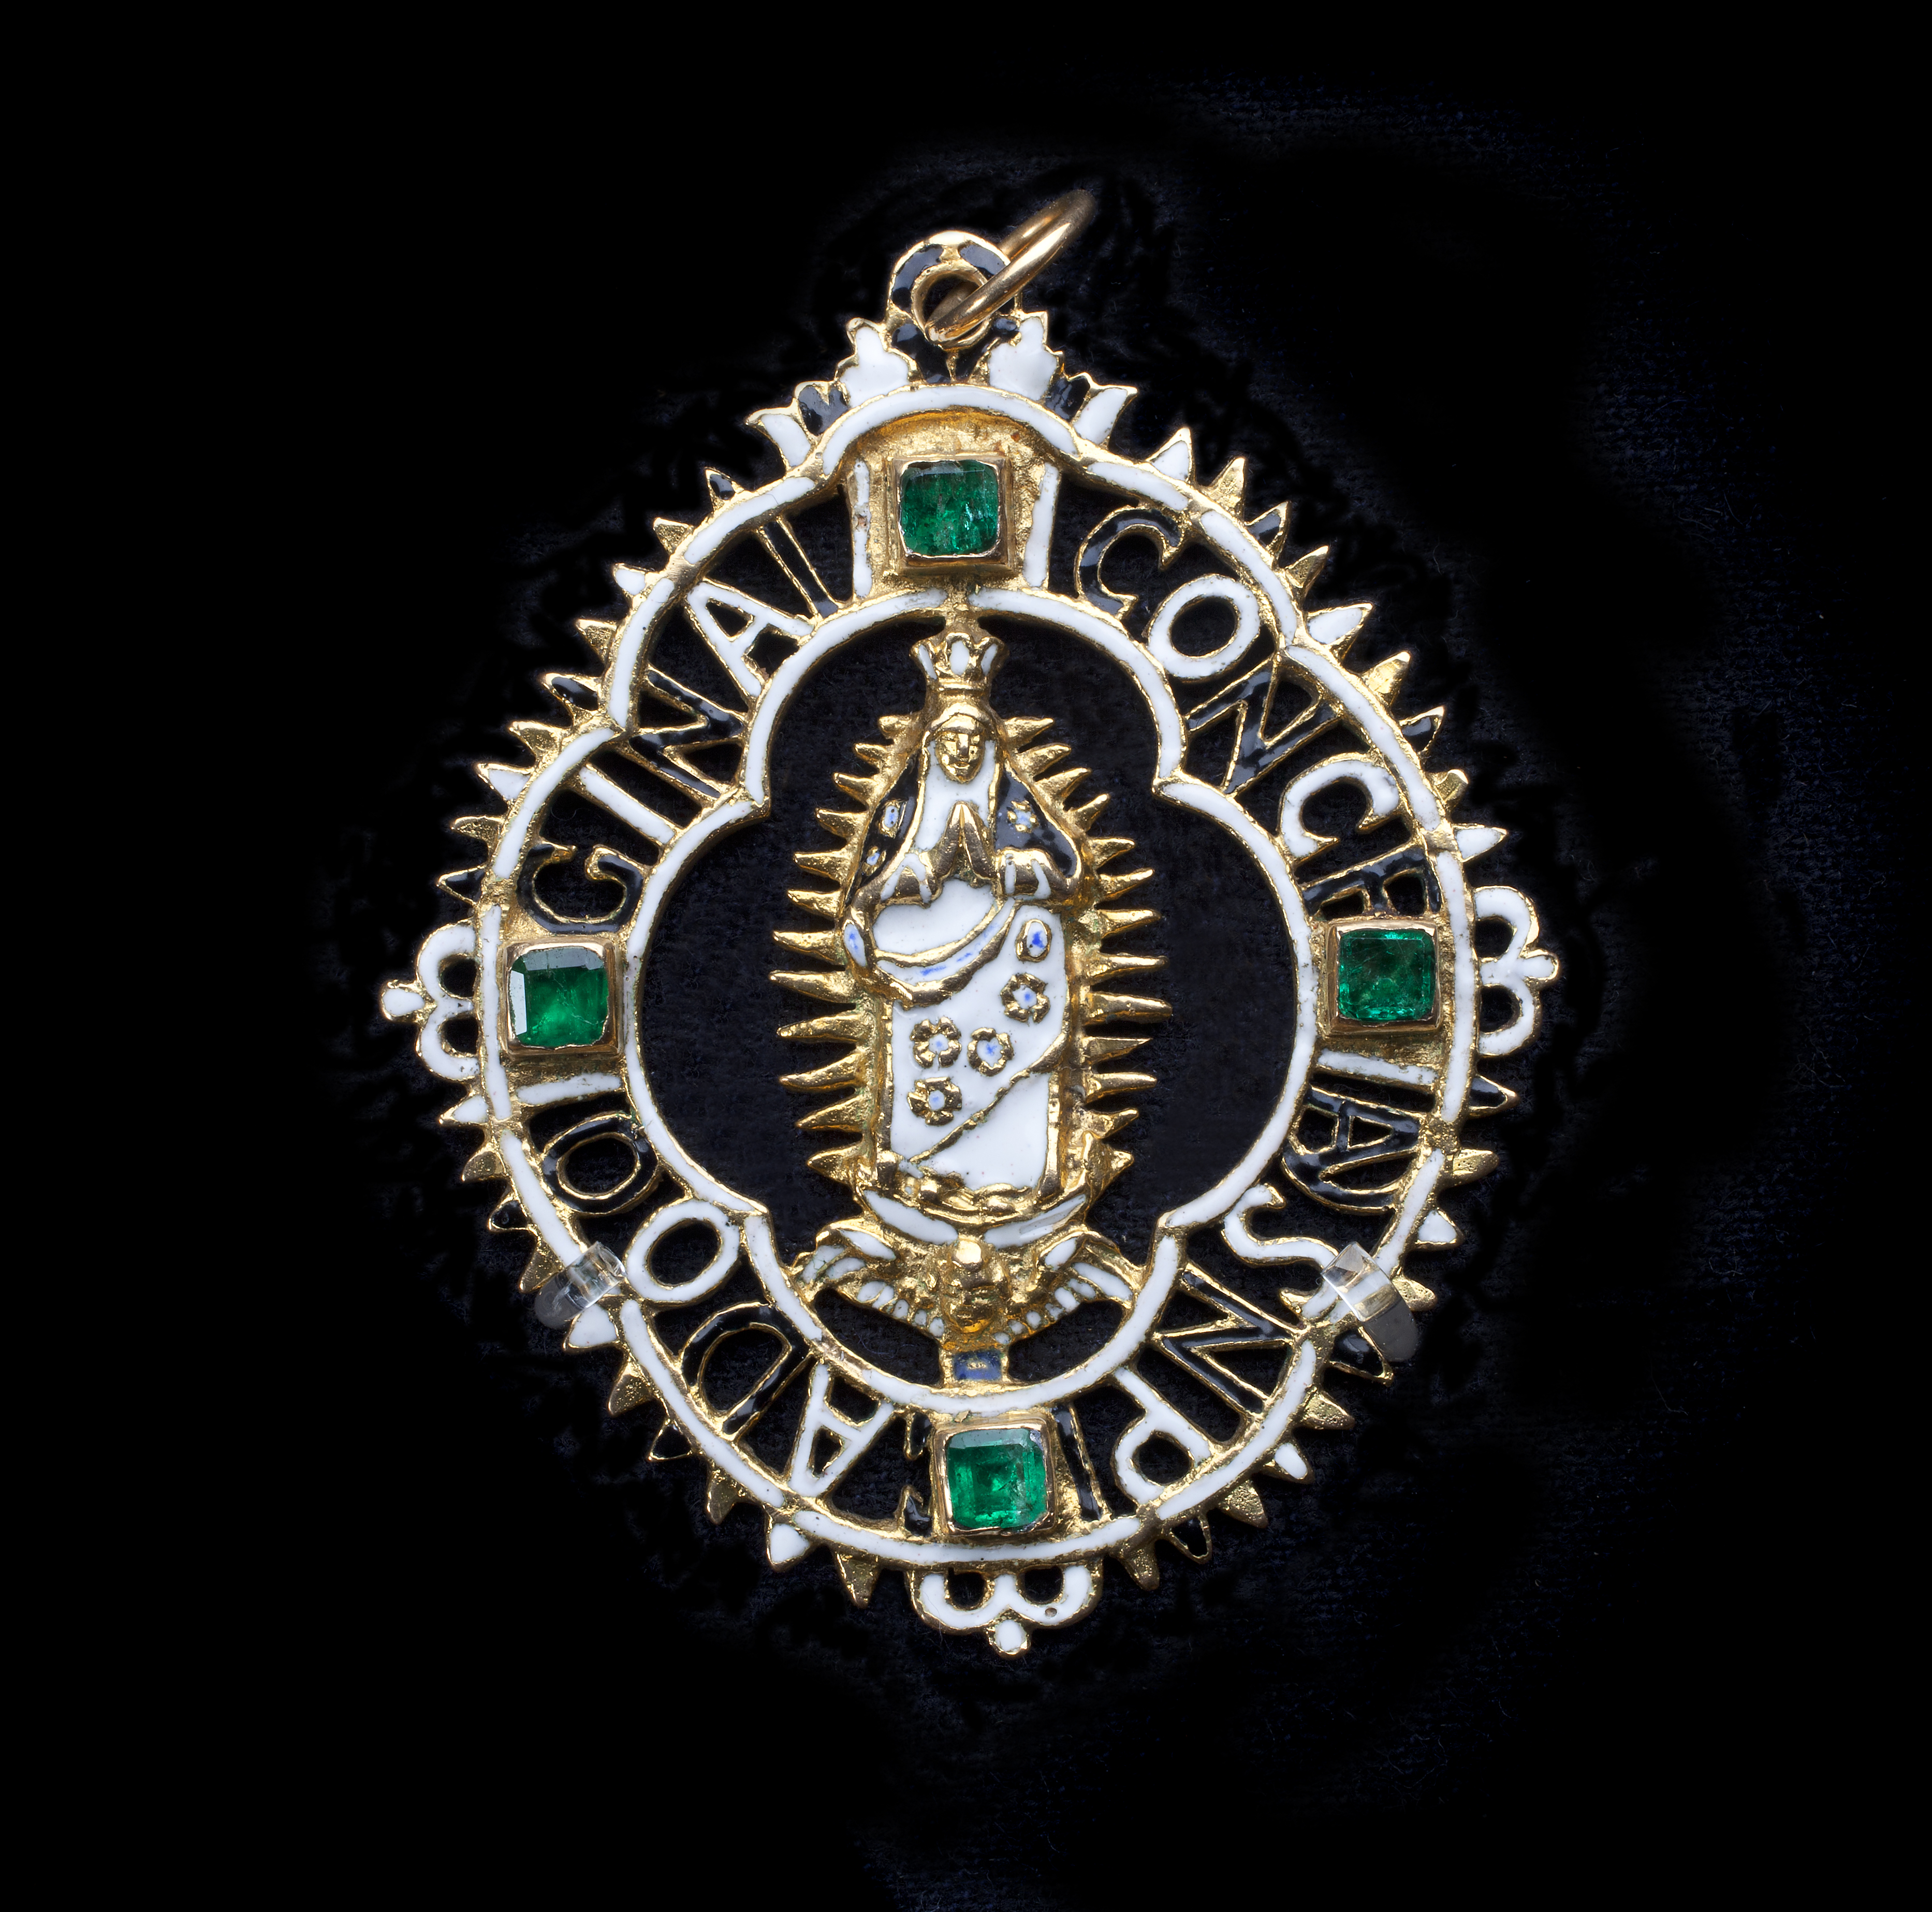 Pendant with the Immaculate Conception